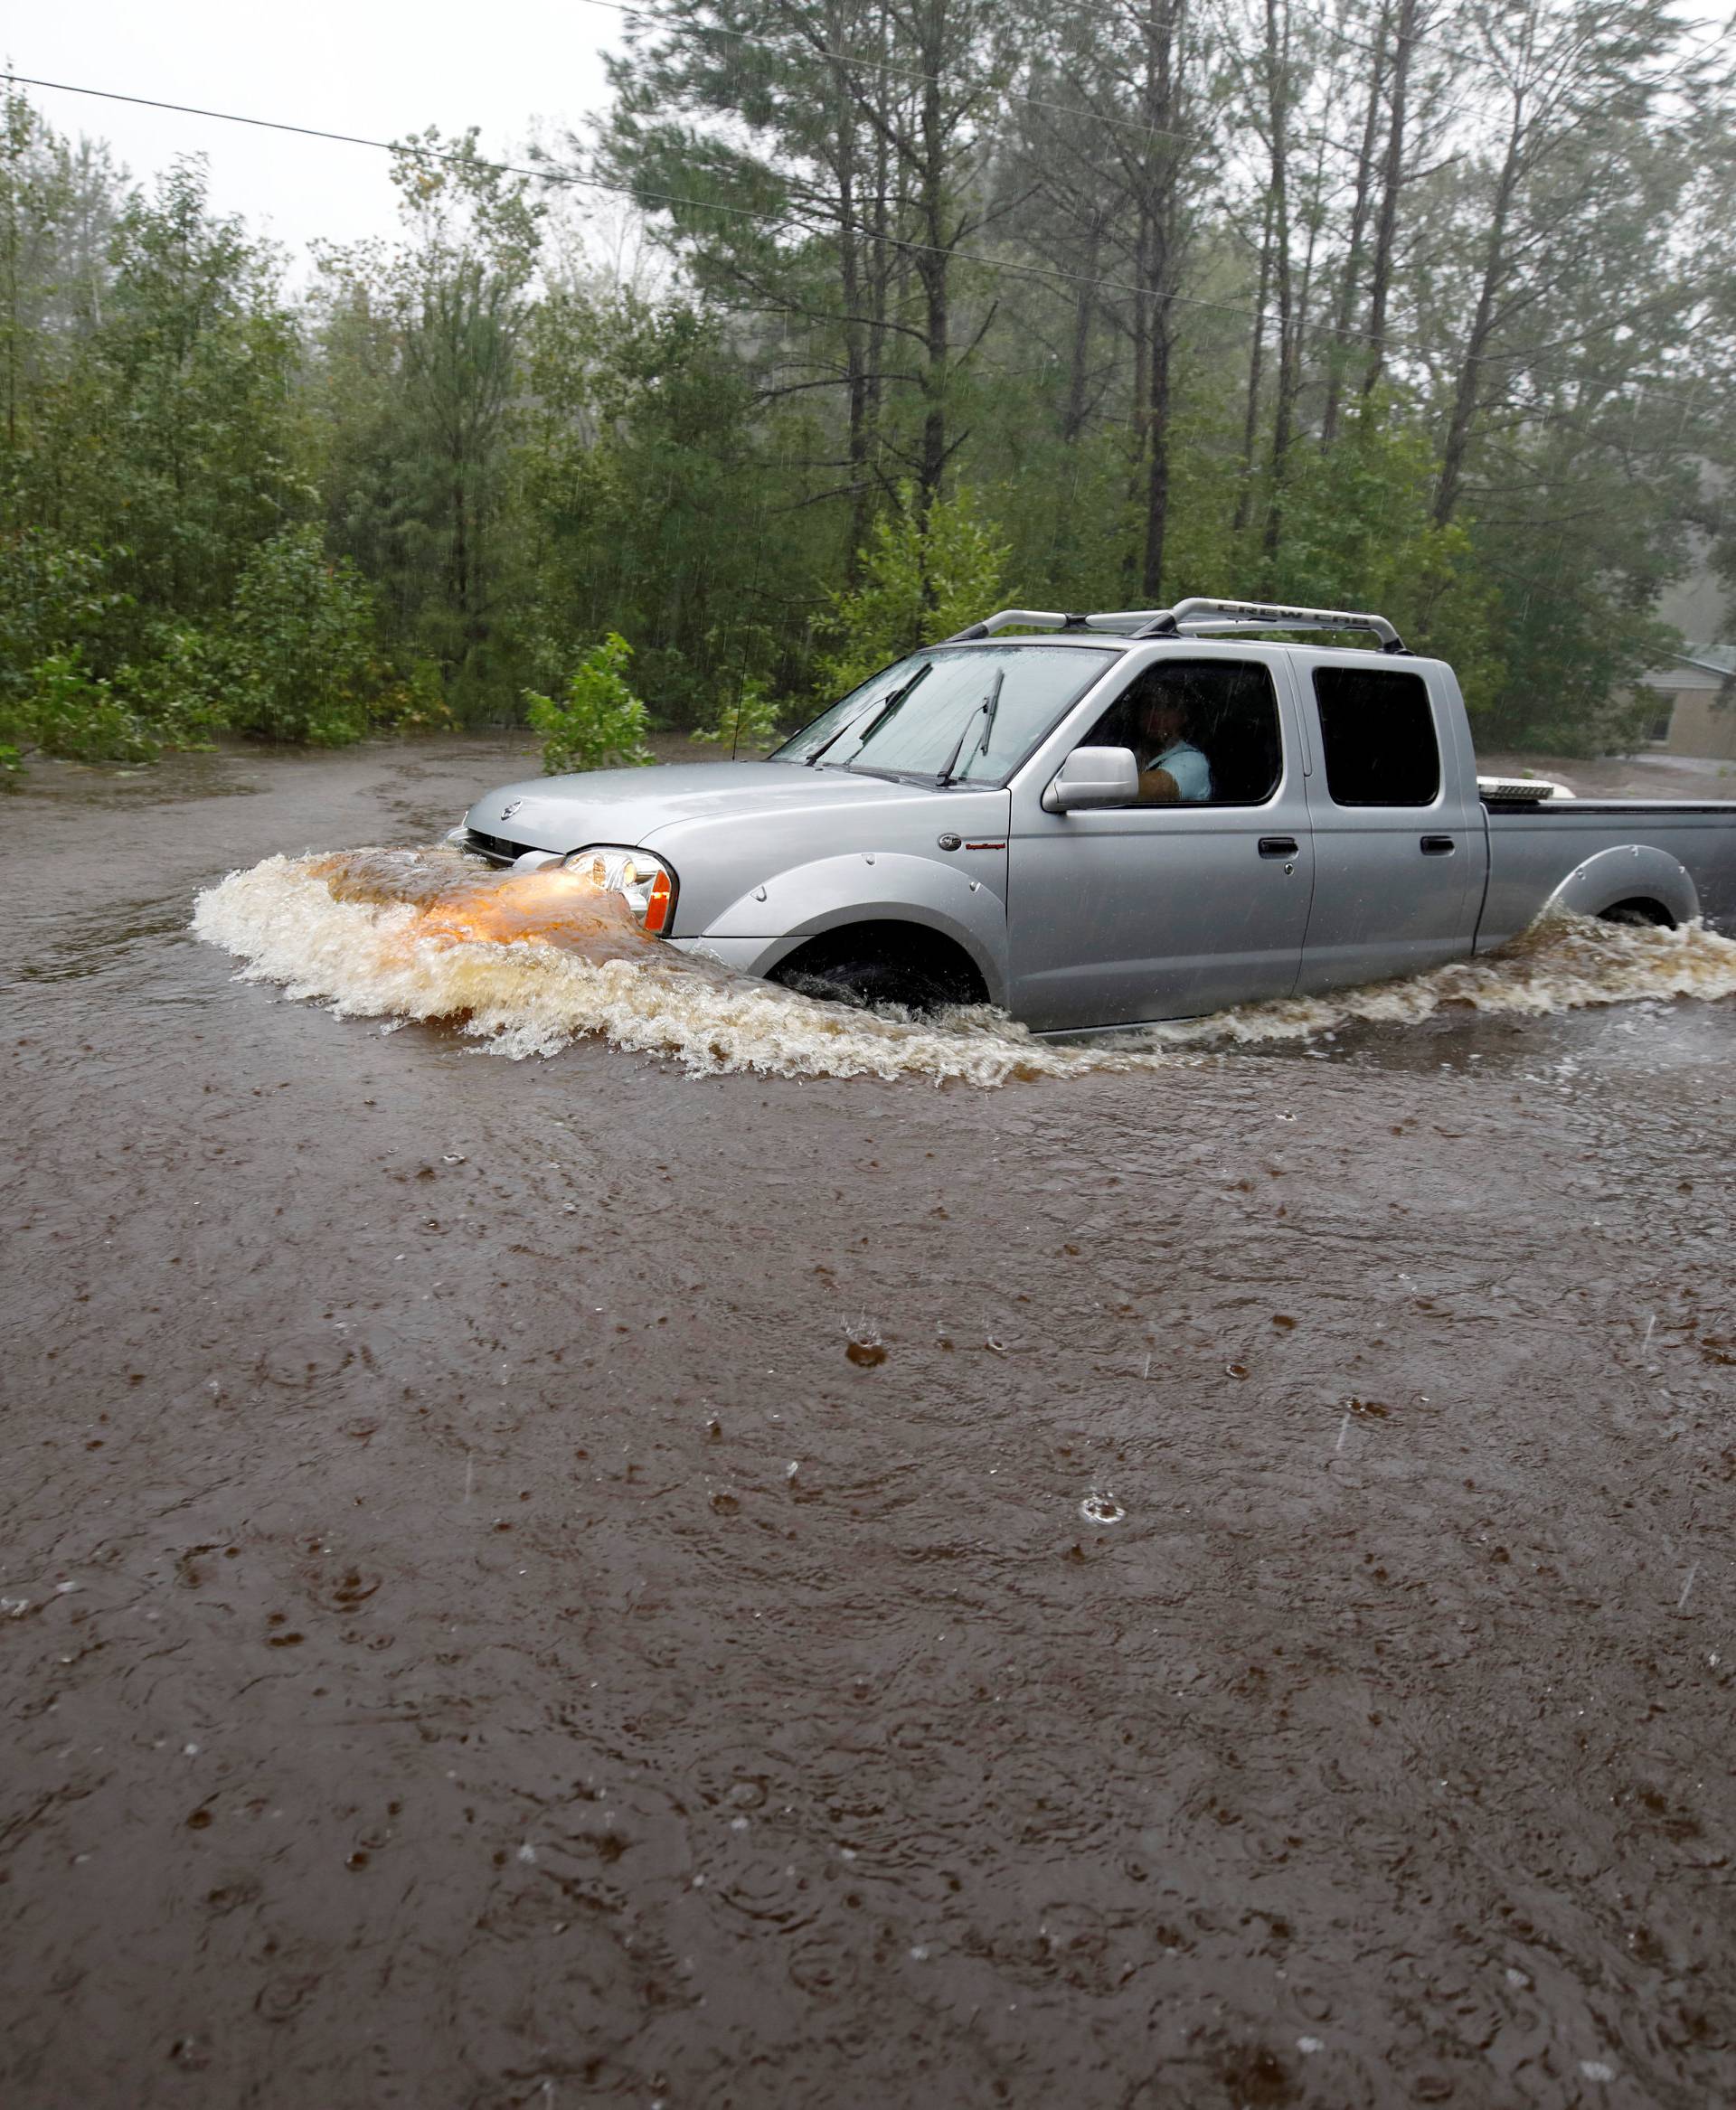 A motorist drives through high waters after Hurricane Florence swept through in North Carolina